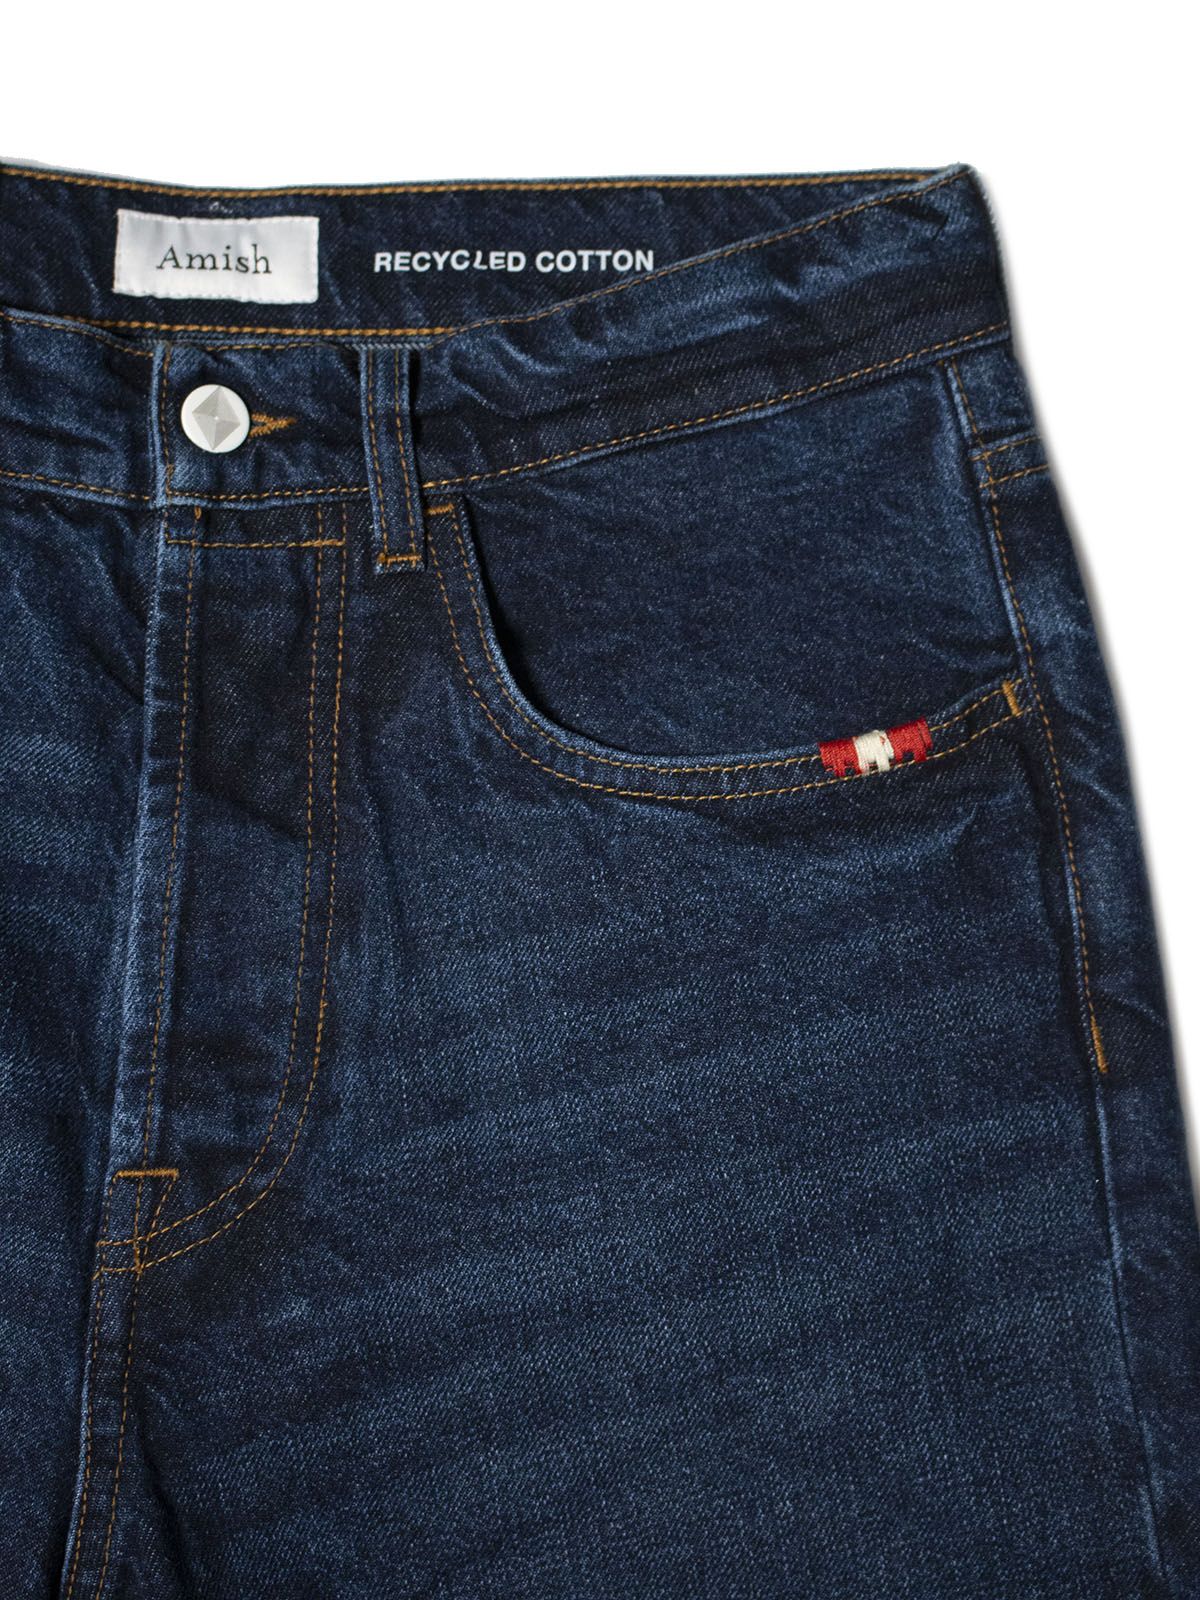 Jeans Uomo Amish - Jeremiah One Month Recycled Denim Jeans - Blu